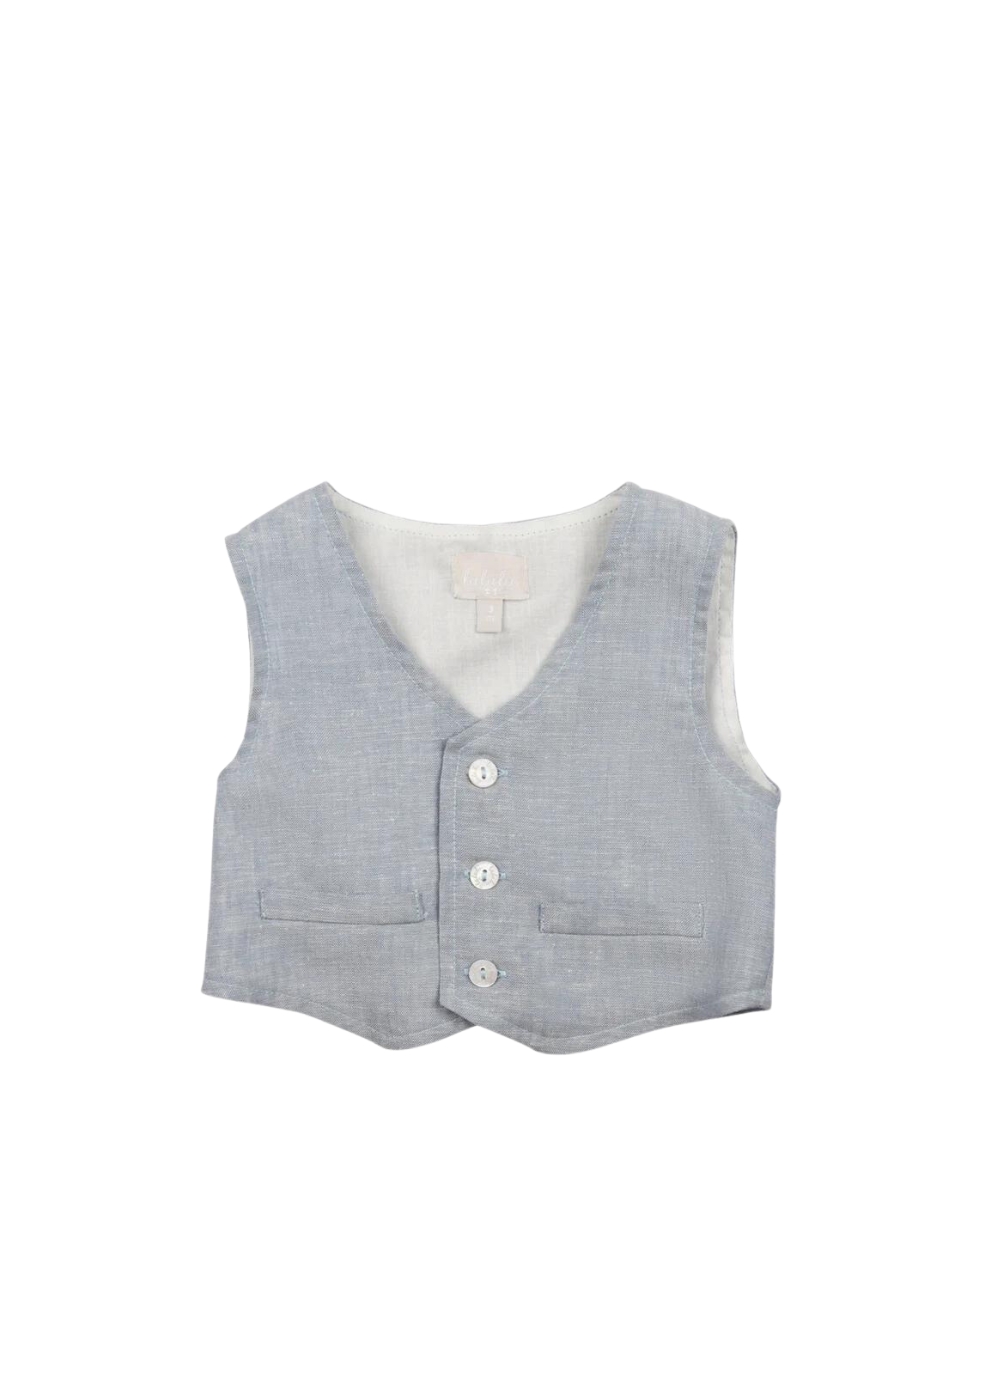 Featured image for “Lalalù Gilet in Lino”